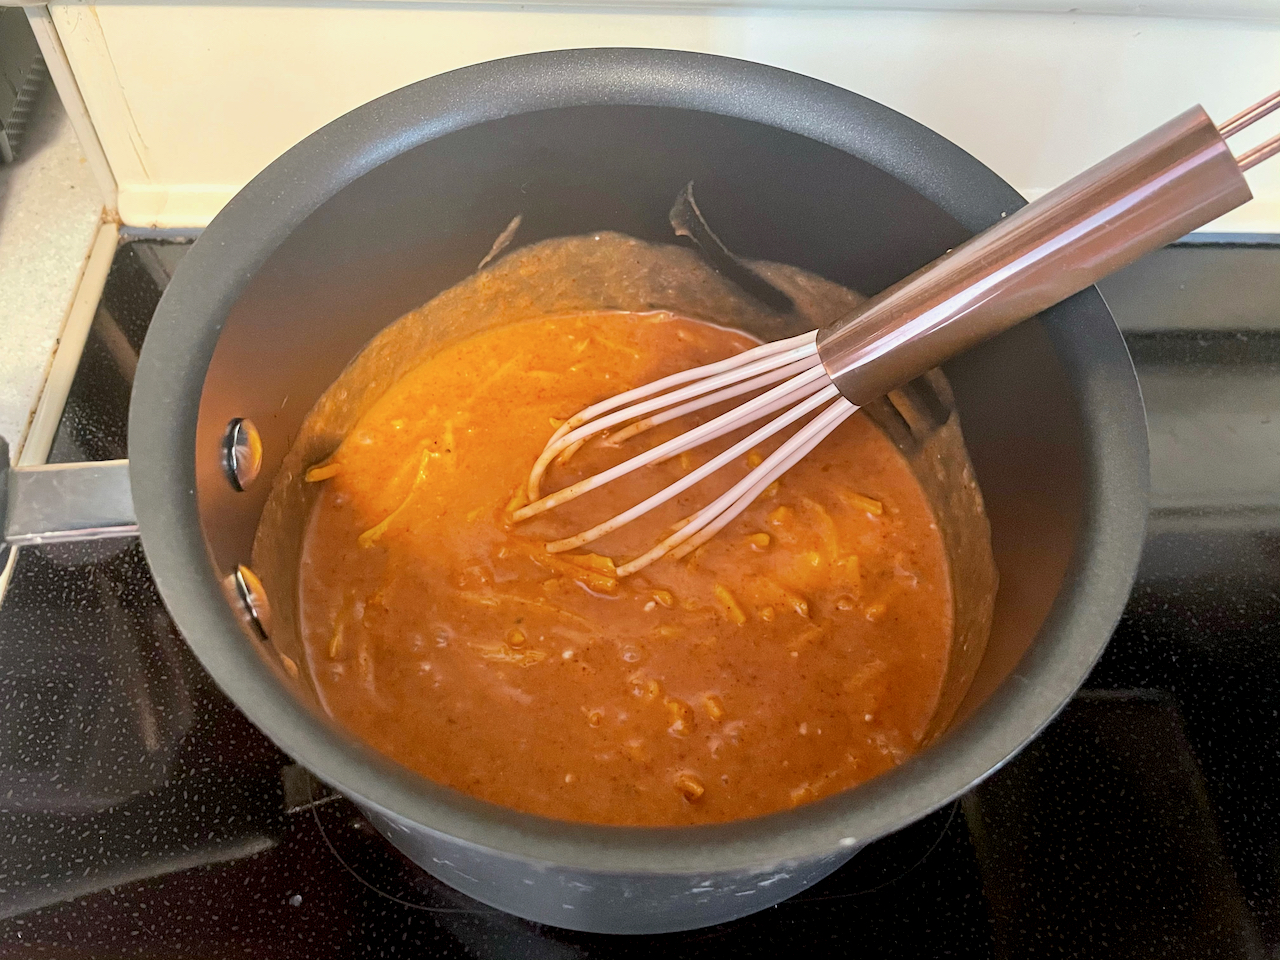 Orange sauce with visible cheese shreds in a black pot with a whisk in it.